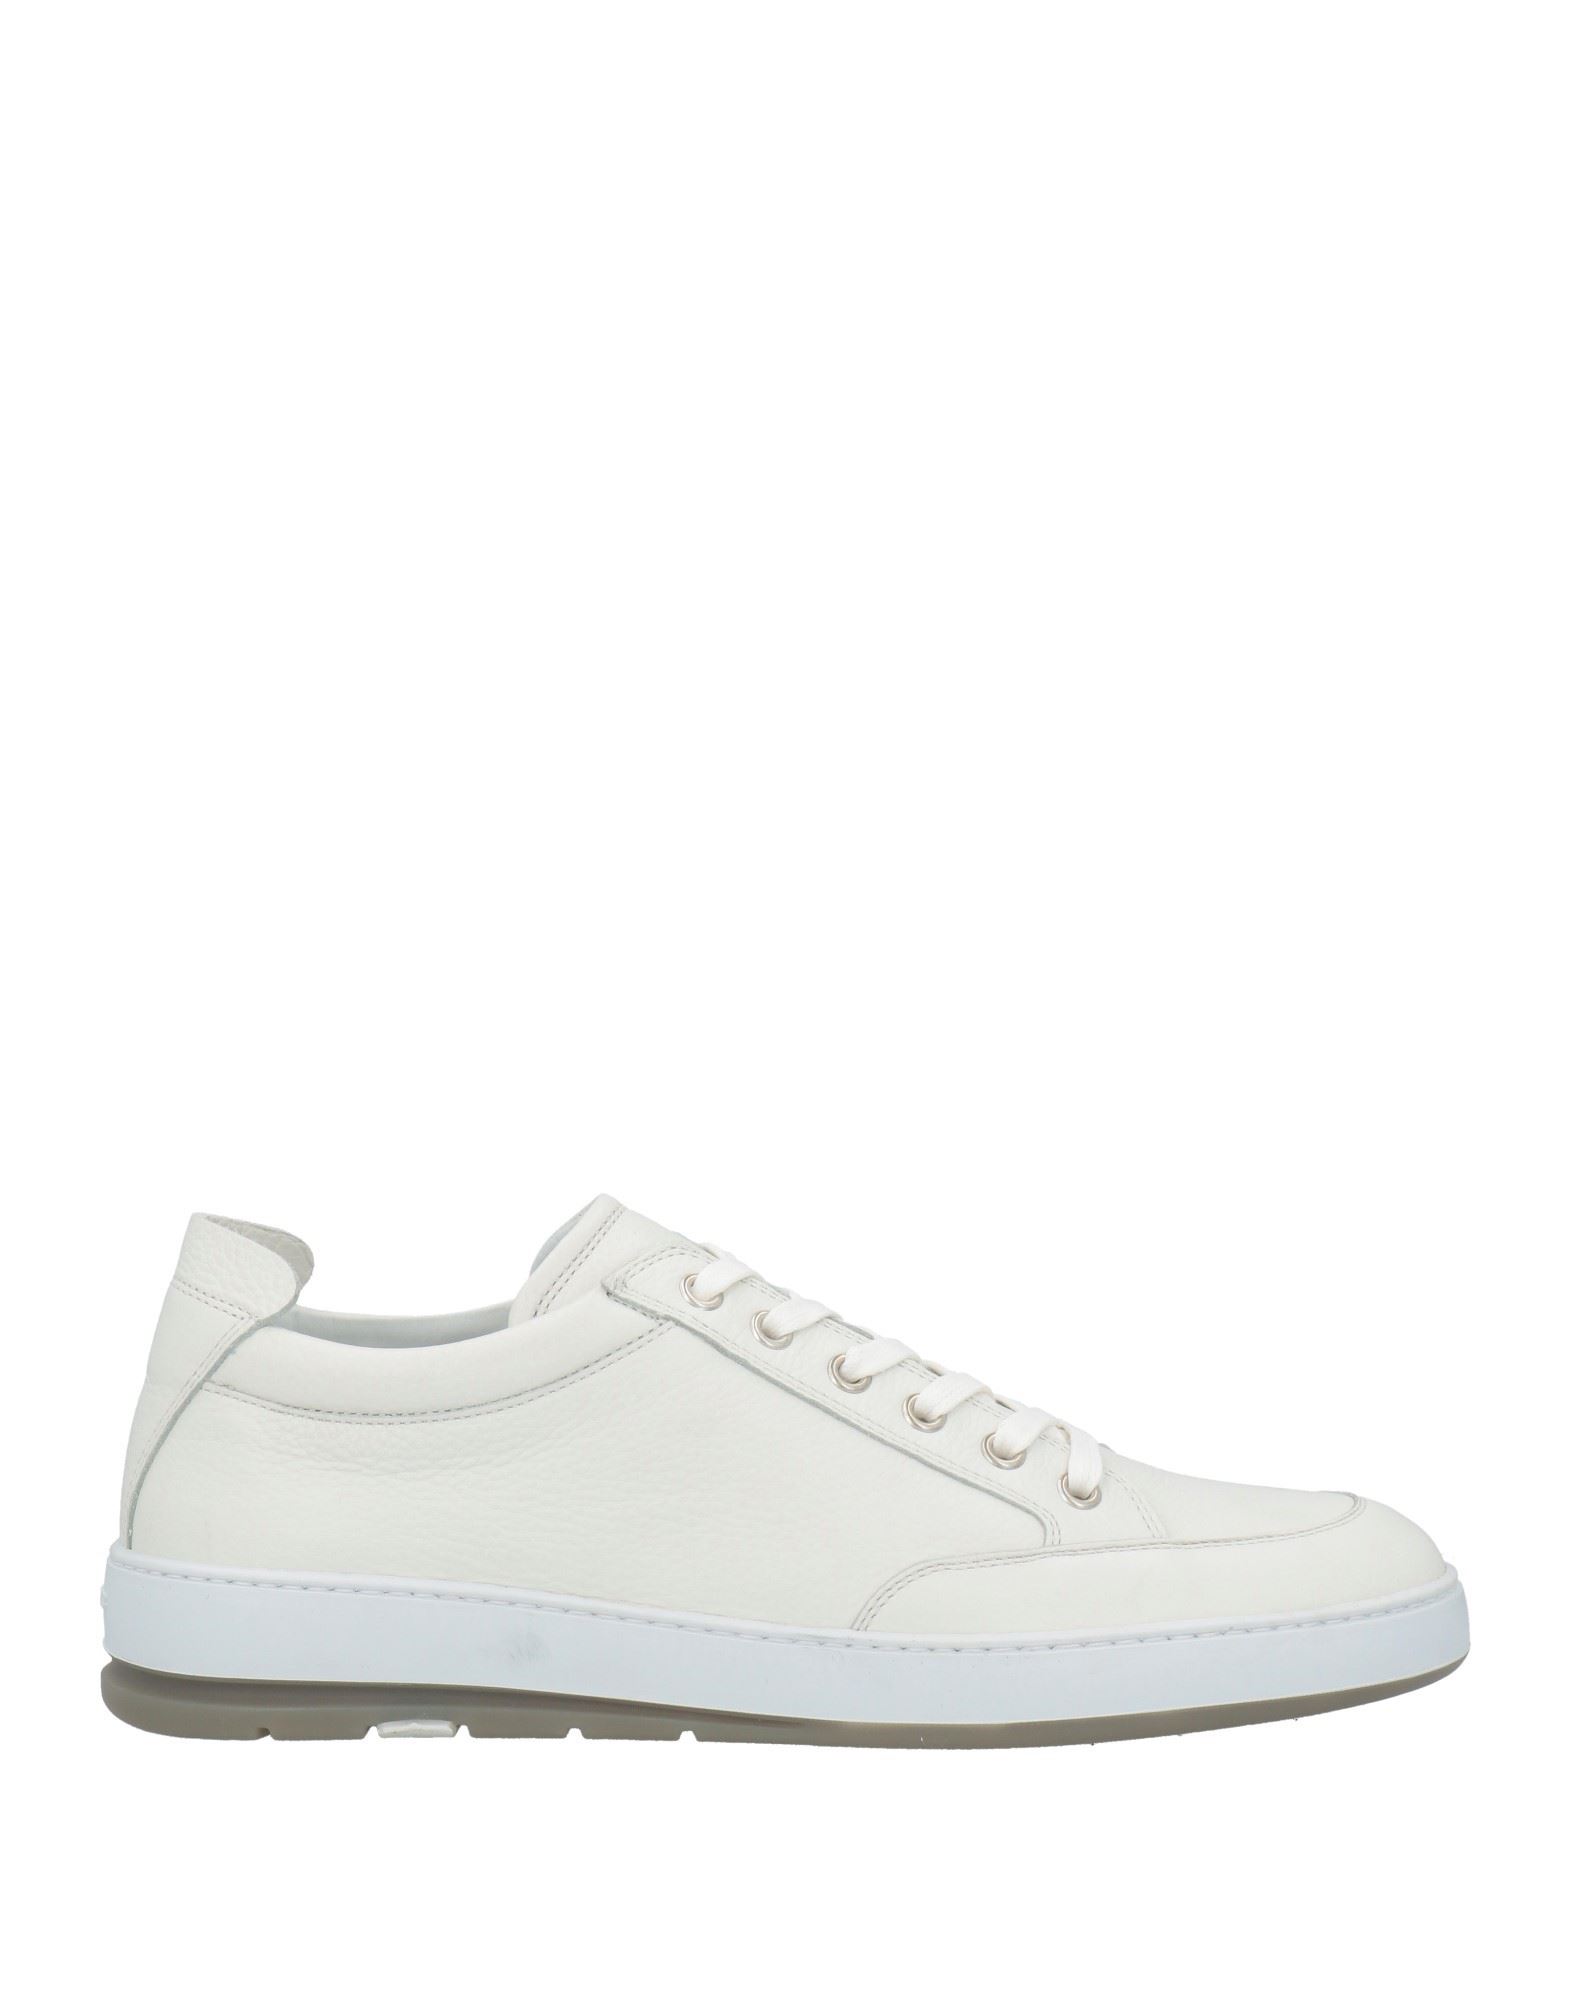 Heschung Sneakers In White